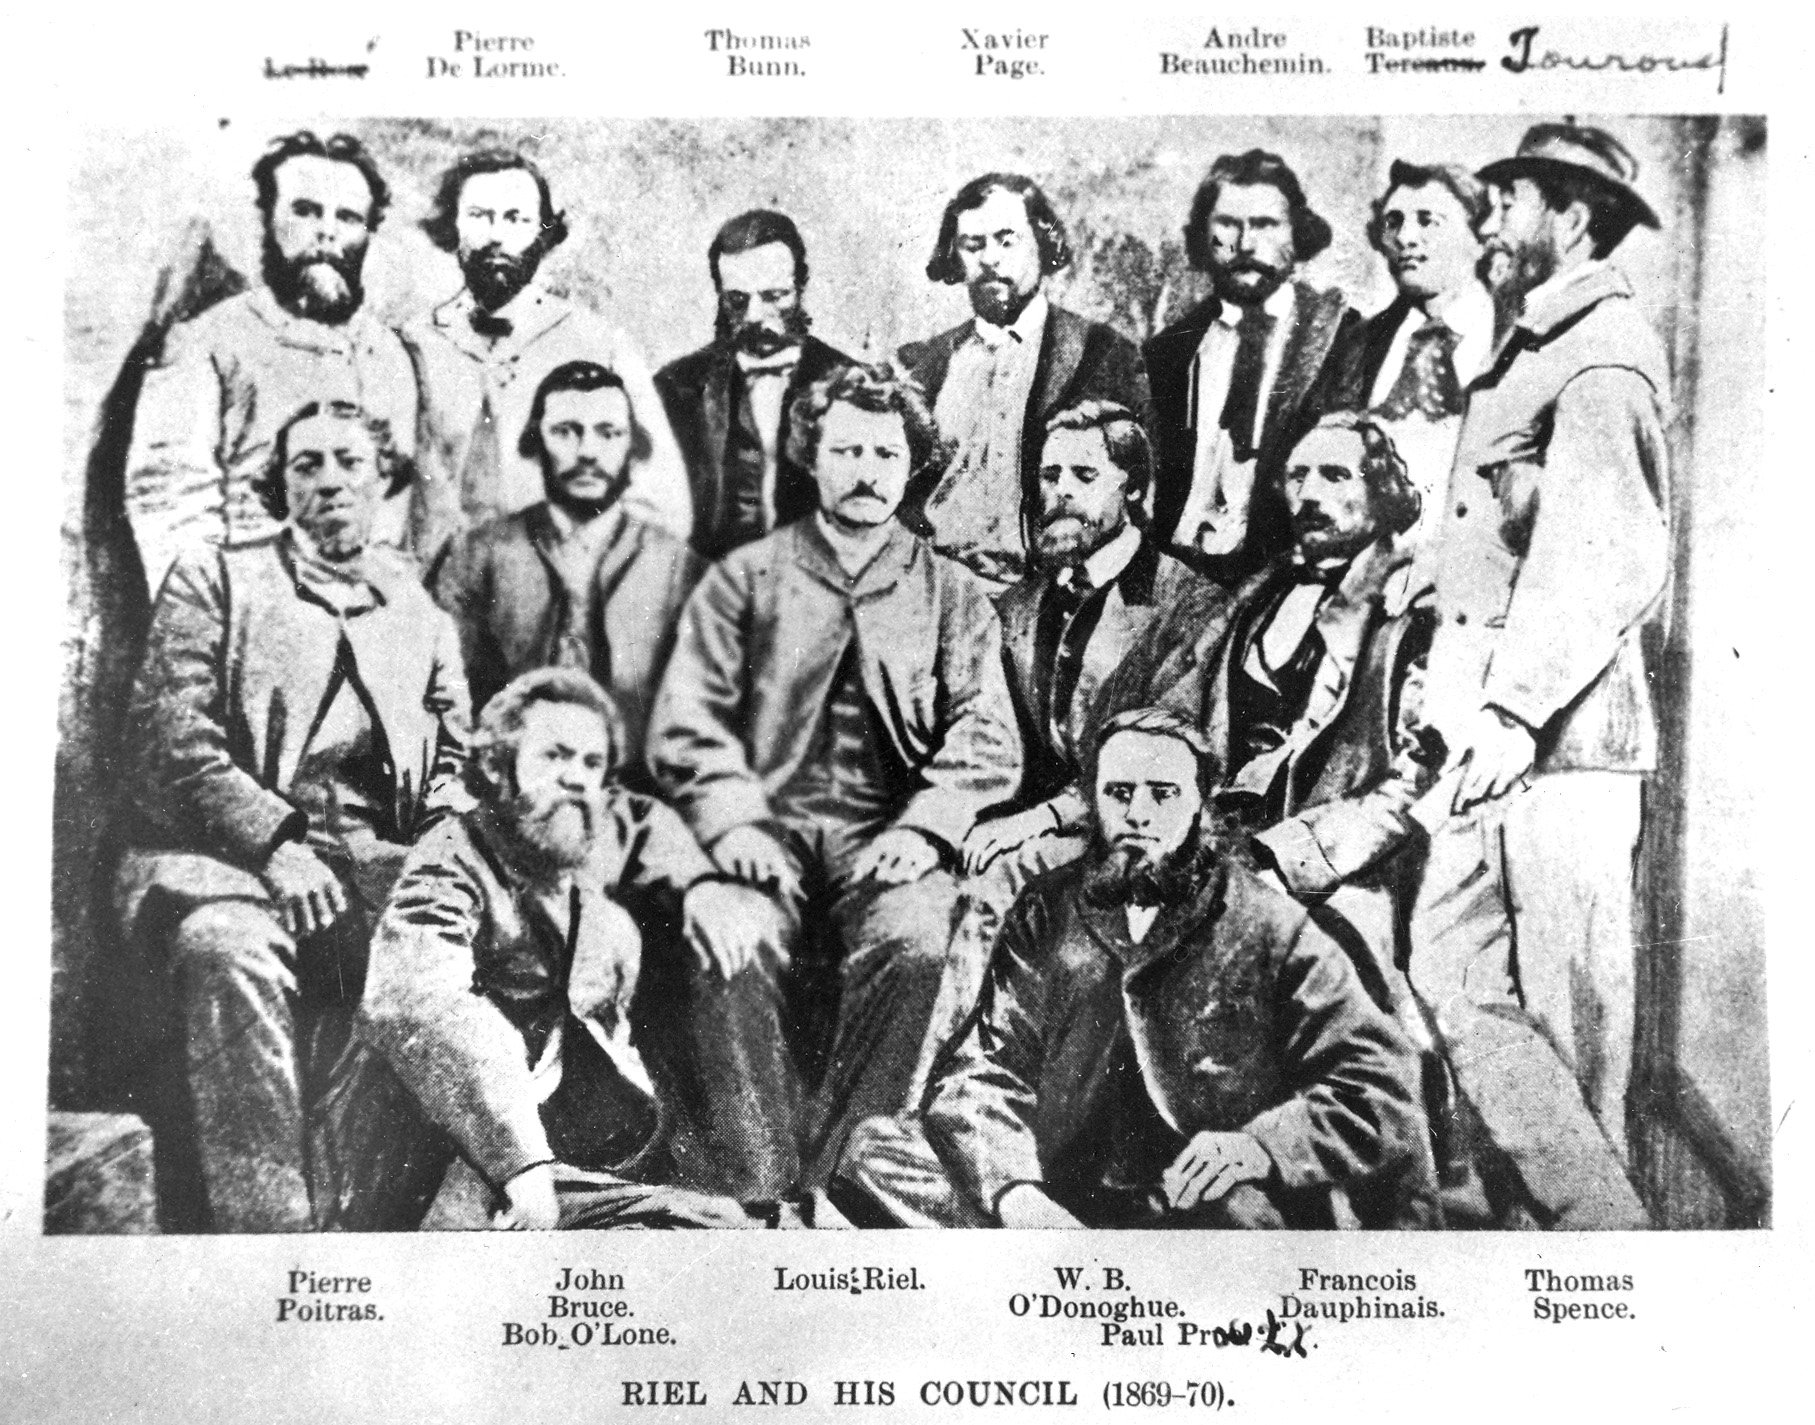 Louis Riel's Provisional Government 2nd row, 3rd from left, Louis Riel Back row, 3rd from left, Thomas Bunn